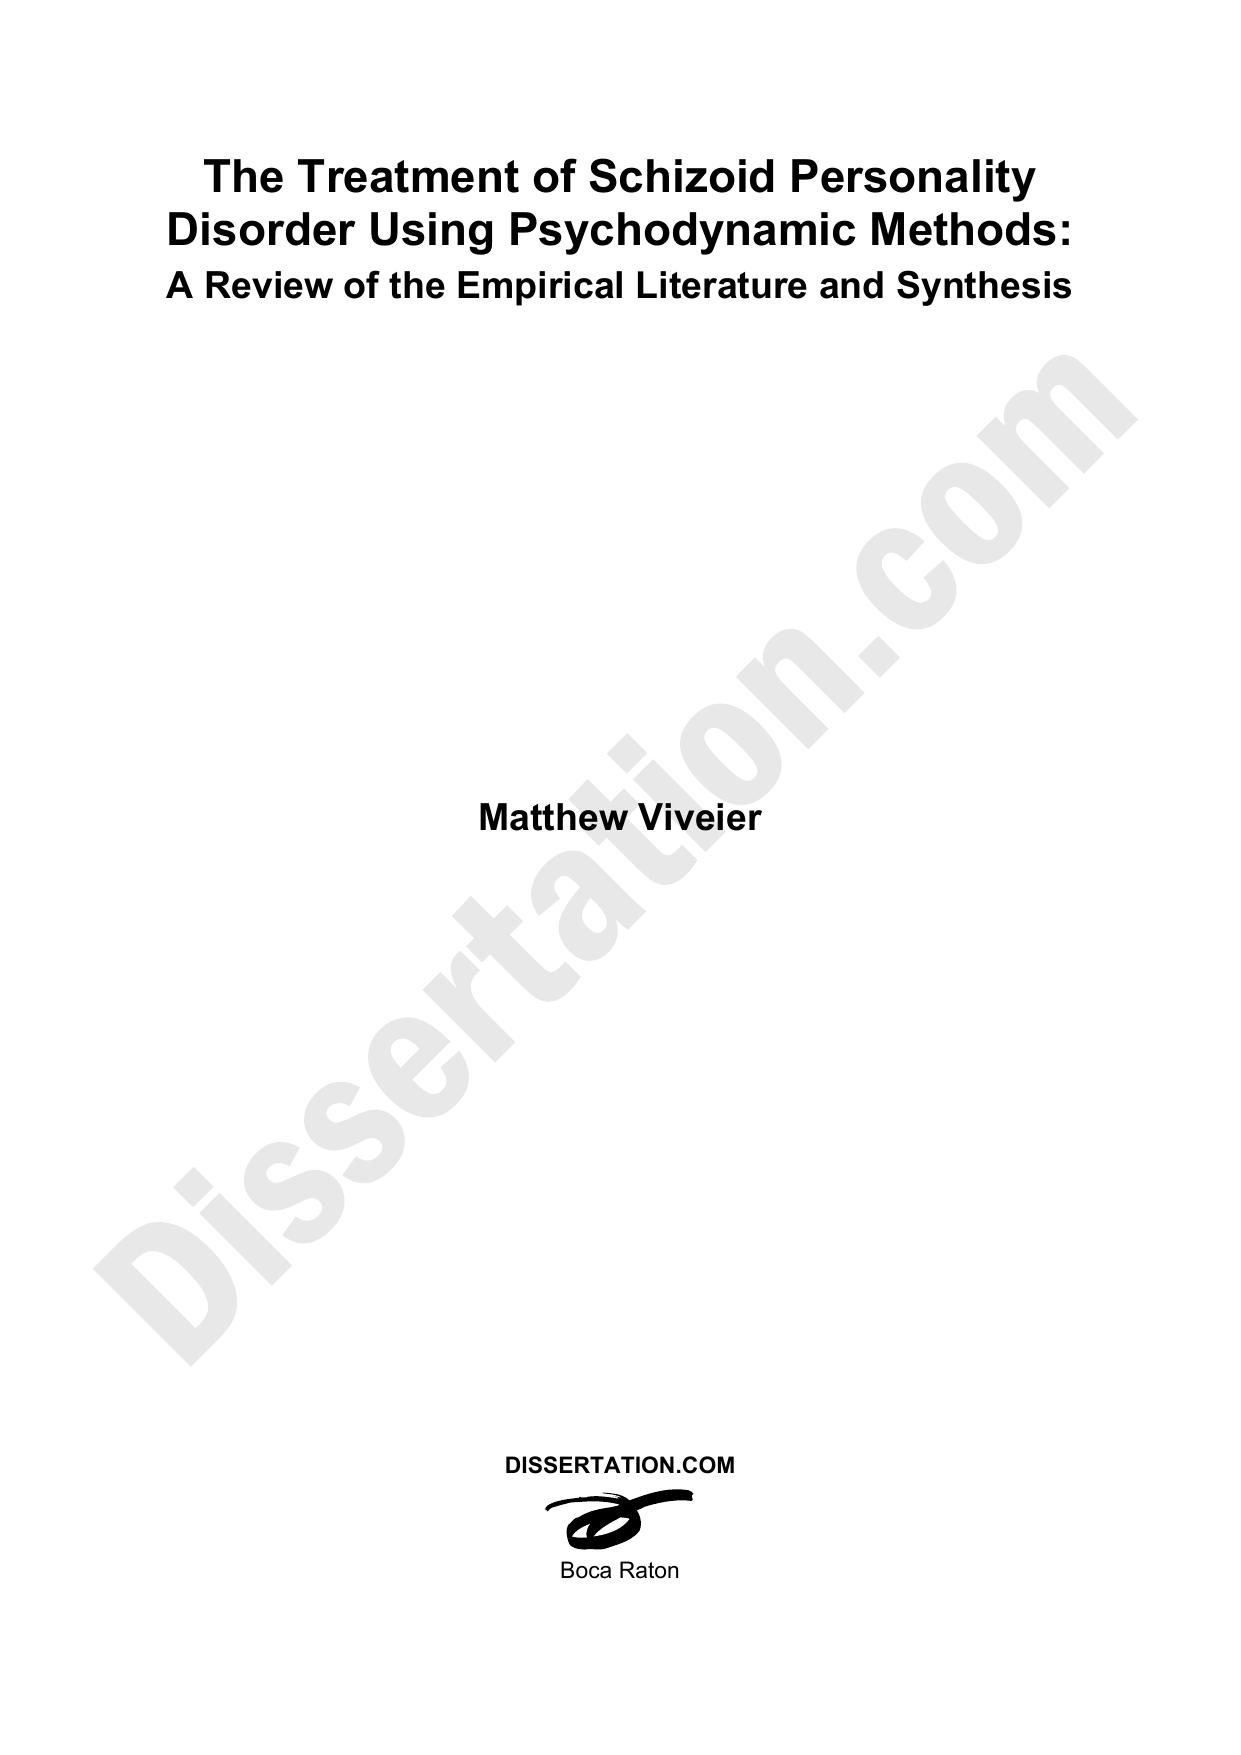 The Treatment of Schizoid Personality Disorder Using Psychodynamic Methods: A Review of the Empirical Literature and Synthesis by Matthew Viveier